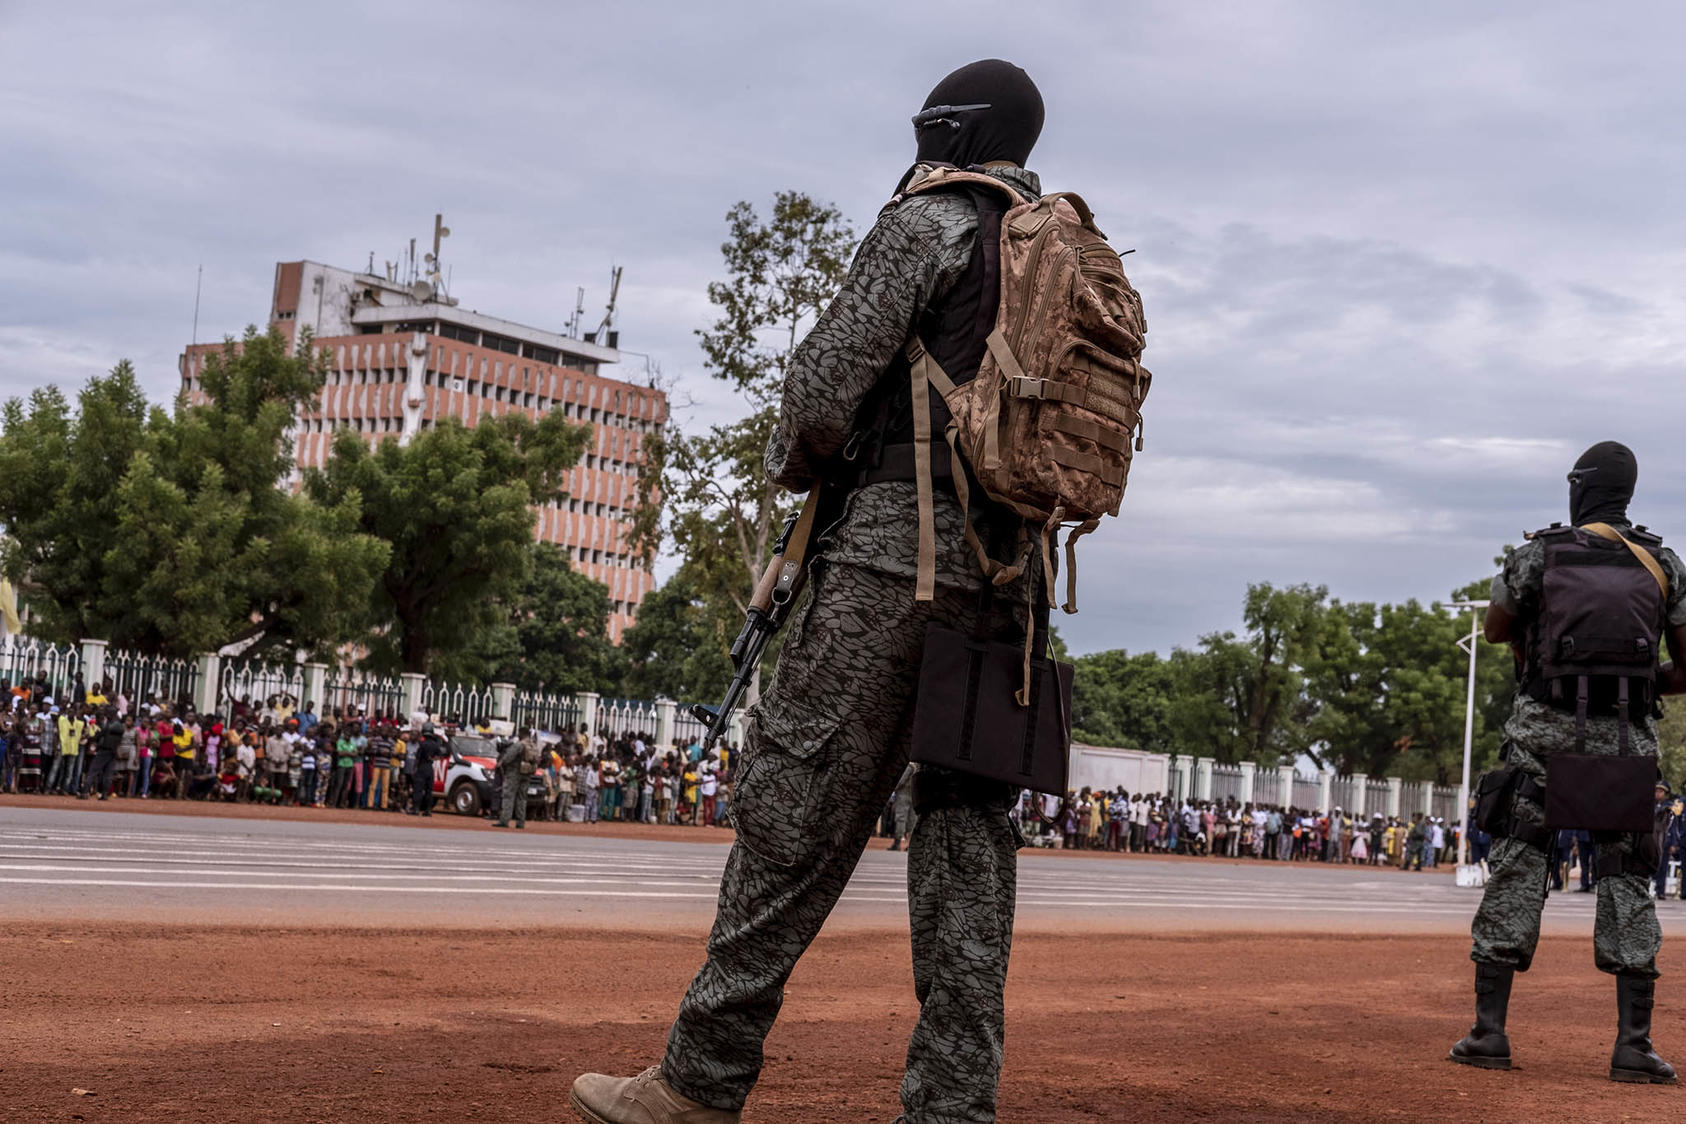 Hooded soldiers trained by Russia’s Wagner group line a parade route in the Central African Republic’s capital, in 2019. The Kremlin is reshuffling control over Wagner, one of its main tools of influence in Africa. (Ashley Gilbertson/The New York Times)